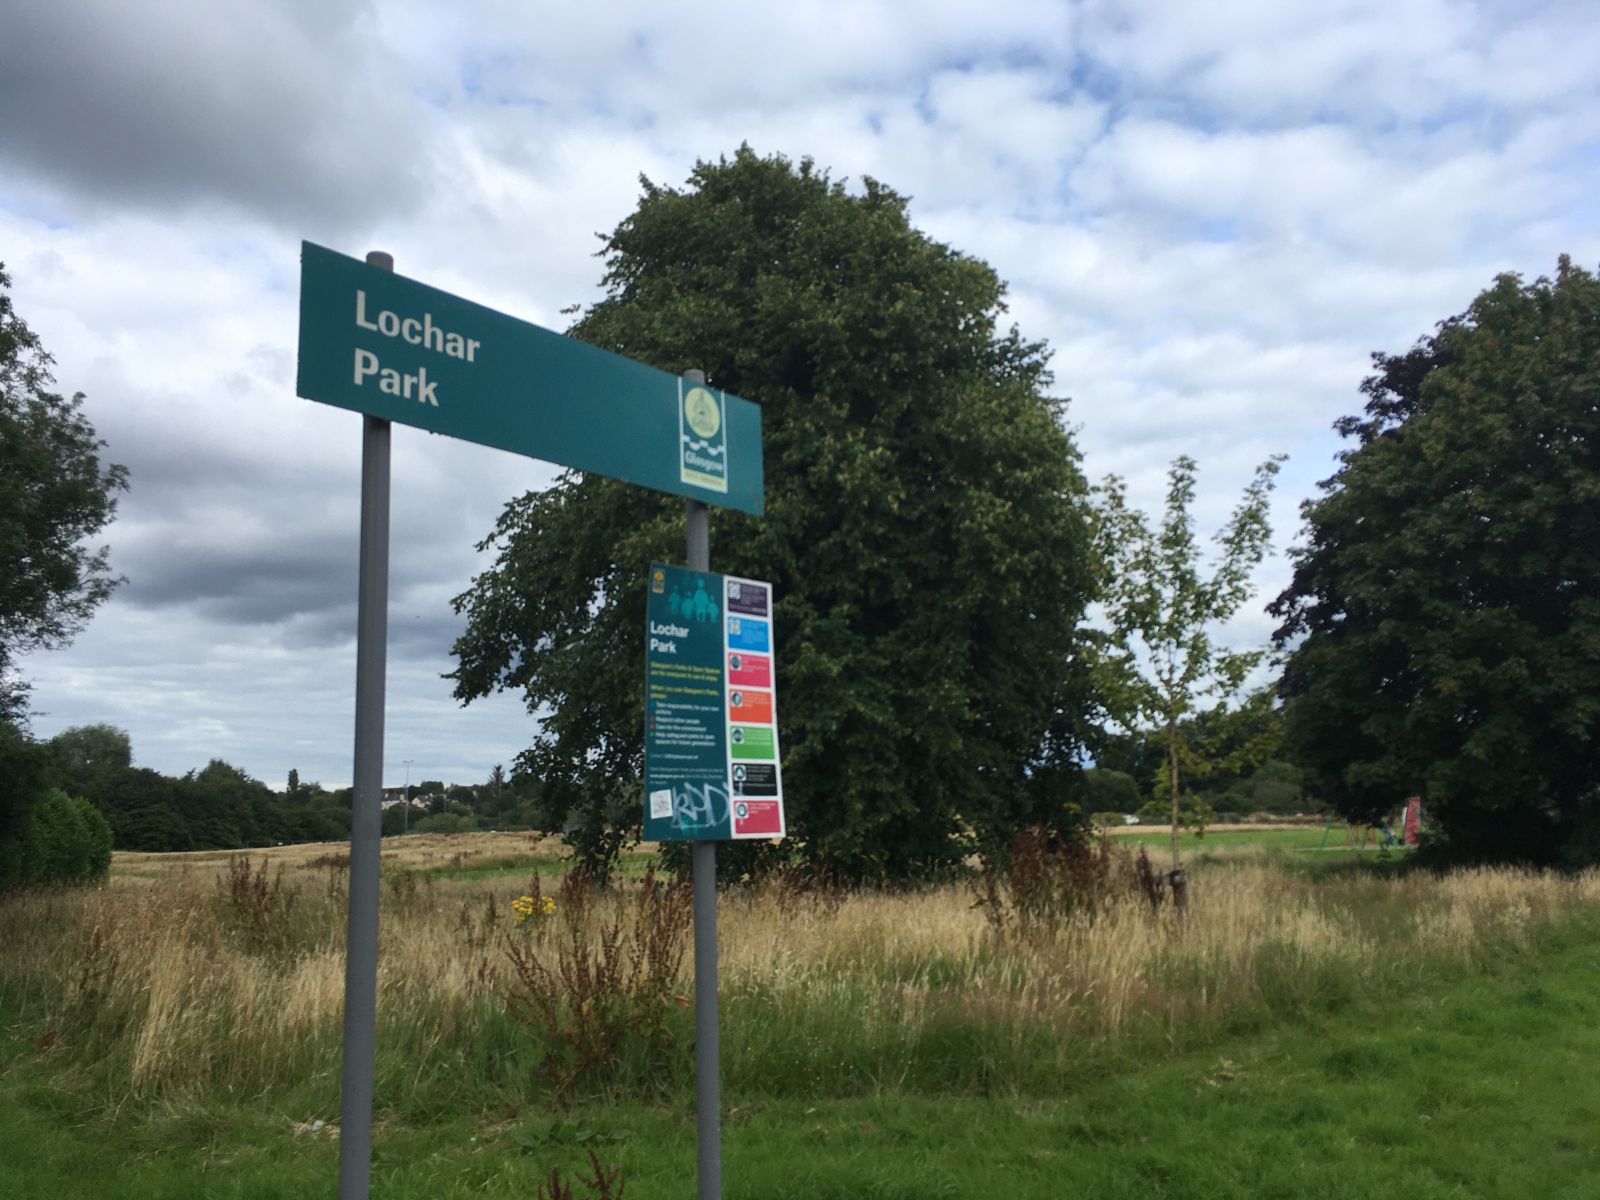 A sign for a park in Pollok, Glasgow.